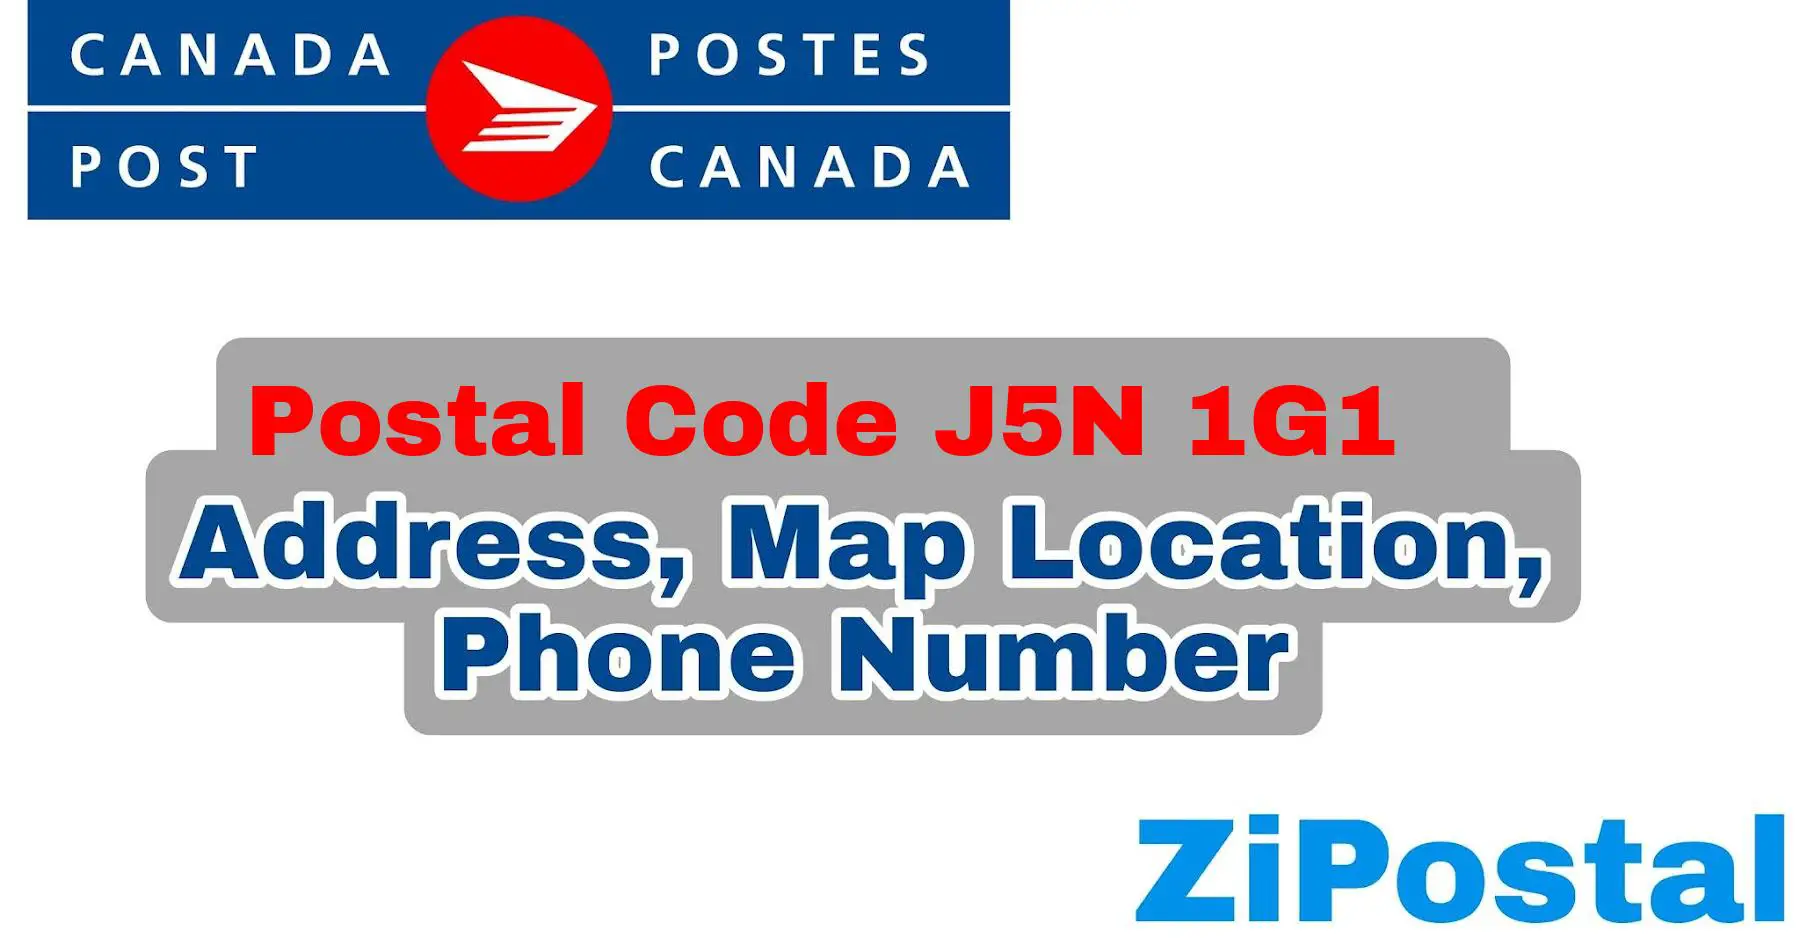 Postal Code J5N 1G1 Address Map Location and Phone Number